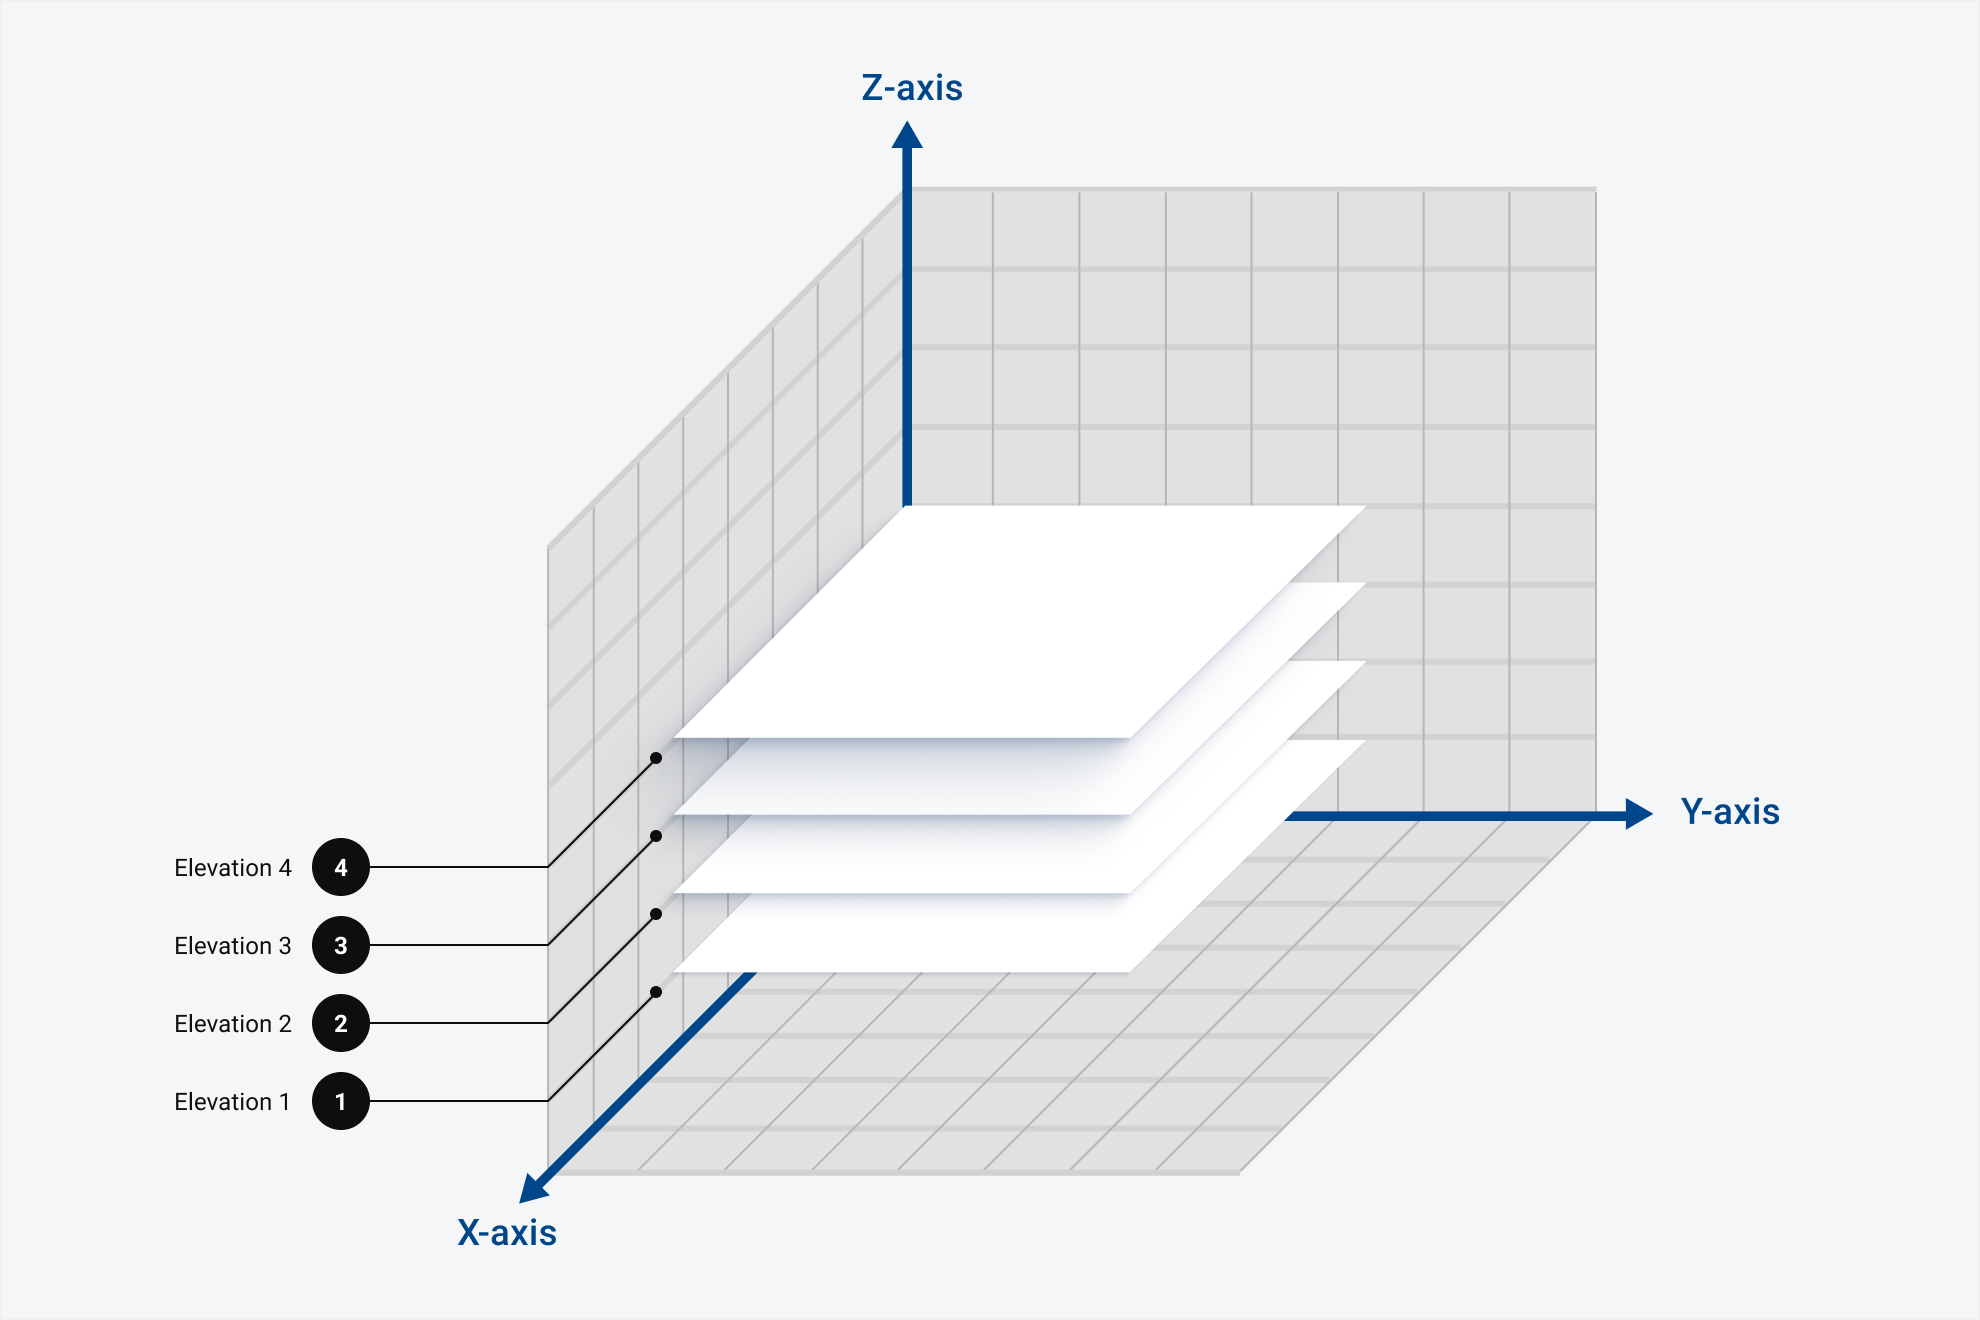 Objects exist in a three-dimensional plane at different depths, represented here by the Y-axis. Each higher depth uses increased shadows to create four levels of elevation:
Elevation Level 1 in this diagram will appear to have the least amount of depth on a page because it falls lower on the Z-axis.
Elevation Level 2 is higher on the Z-axis, rising above Level 1.
Elevation Level 3 will fall between the highest level and the lowest levels of elevation.
Elevation Level 4 is the highest on the Z-axis and will appear to have the most depth and dimension on a page.